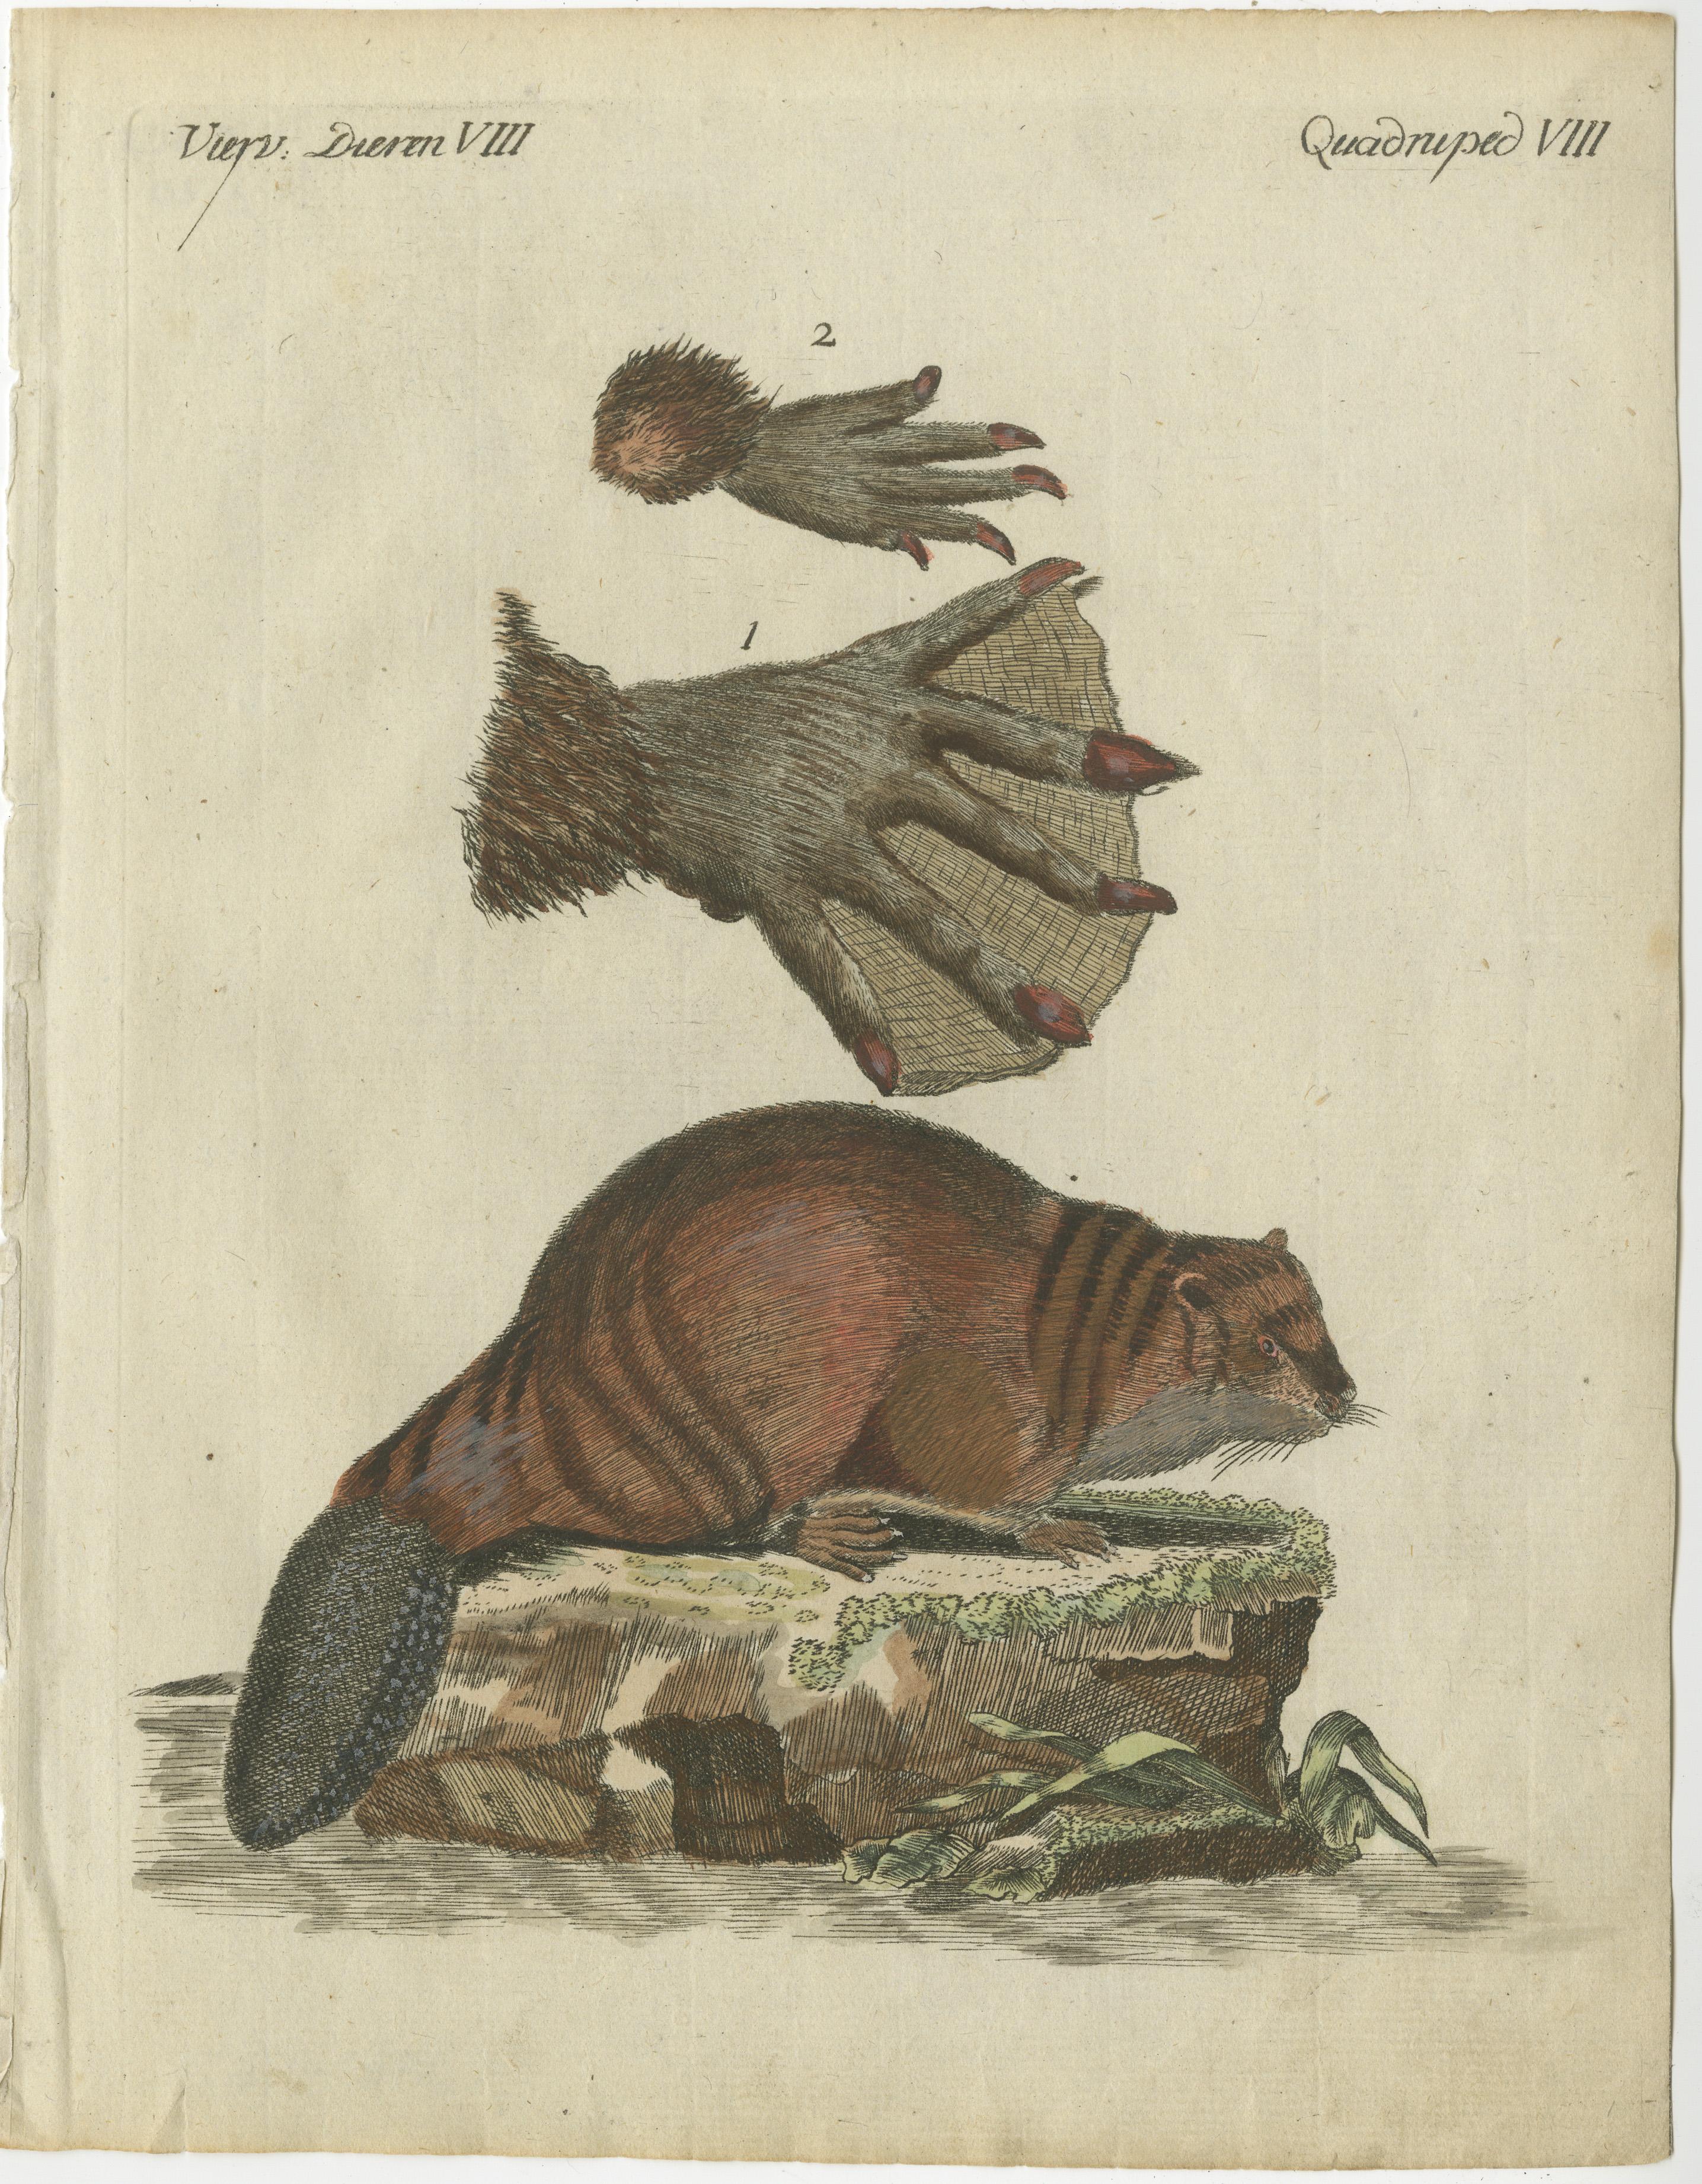 Original antique print of a beaver. This engraved print originates from a very rare unknown Dutch work. The plates are similar to the plates in the famous German work: ‘Bilderbuch fur Kinder' by F.J. Bertuch, published 1790-1830 in Weimar. This